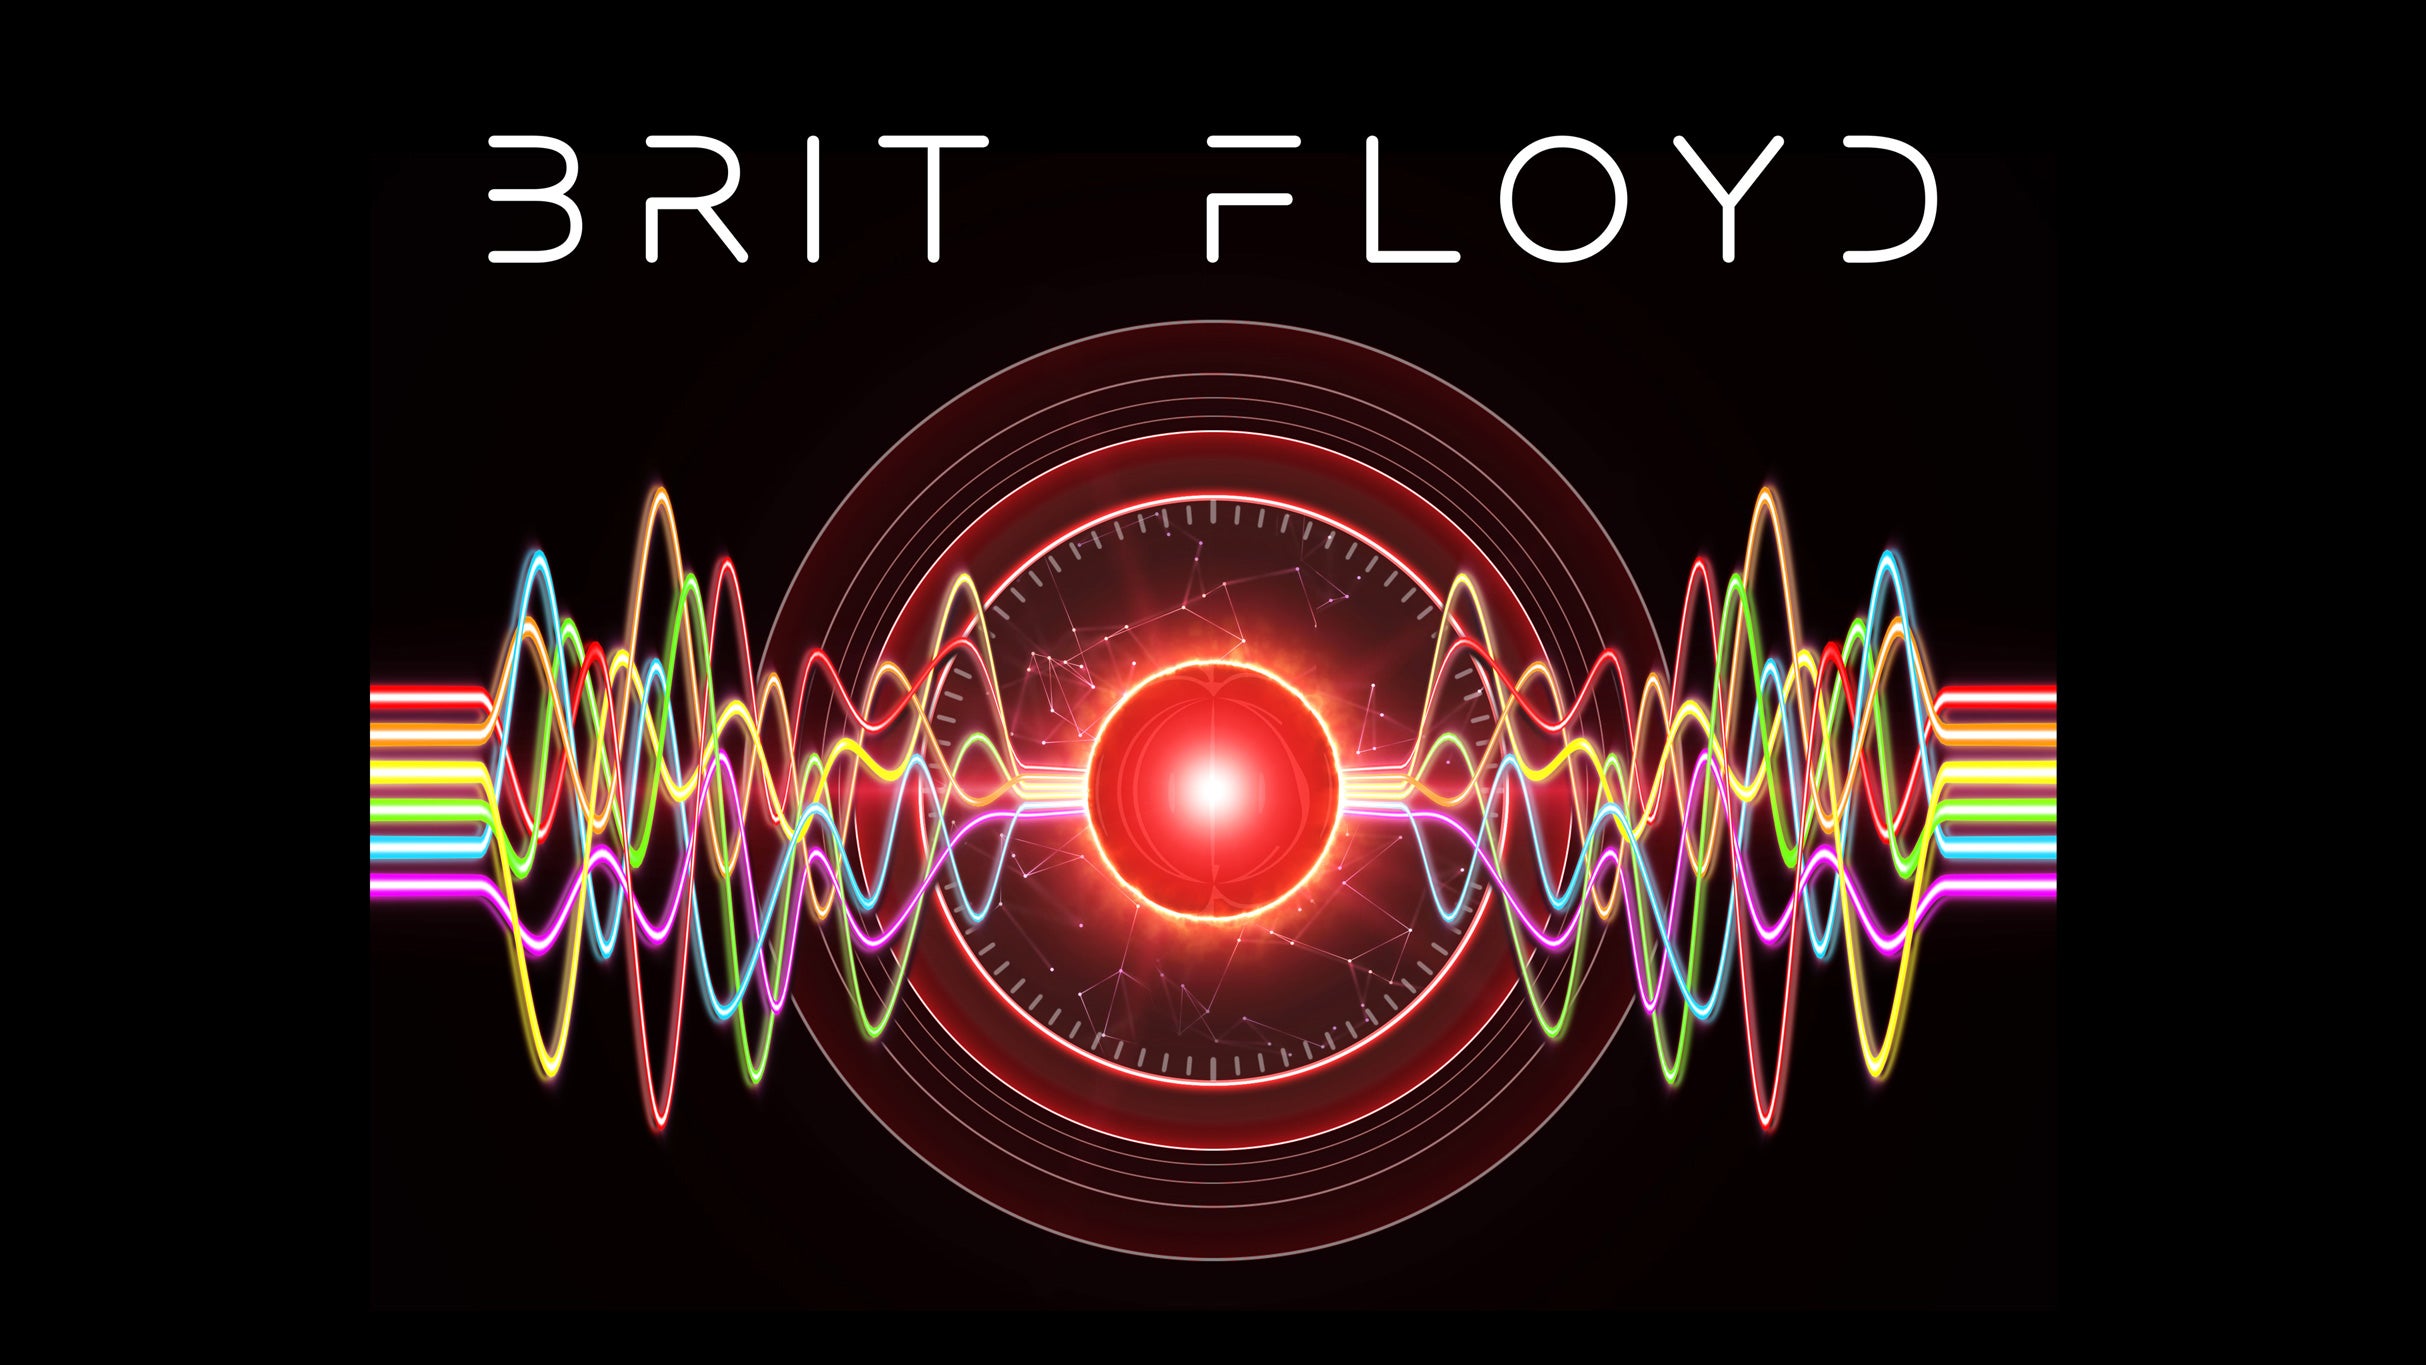 Brit Floyd: The World's Greatest Pink Floyd Show presale password for your tickets in Reno